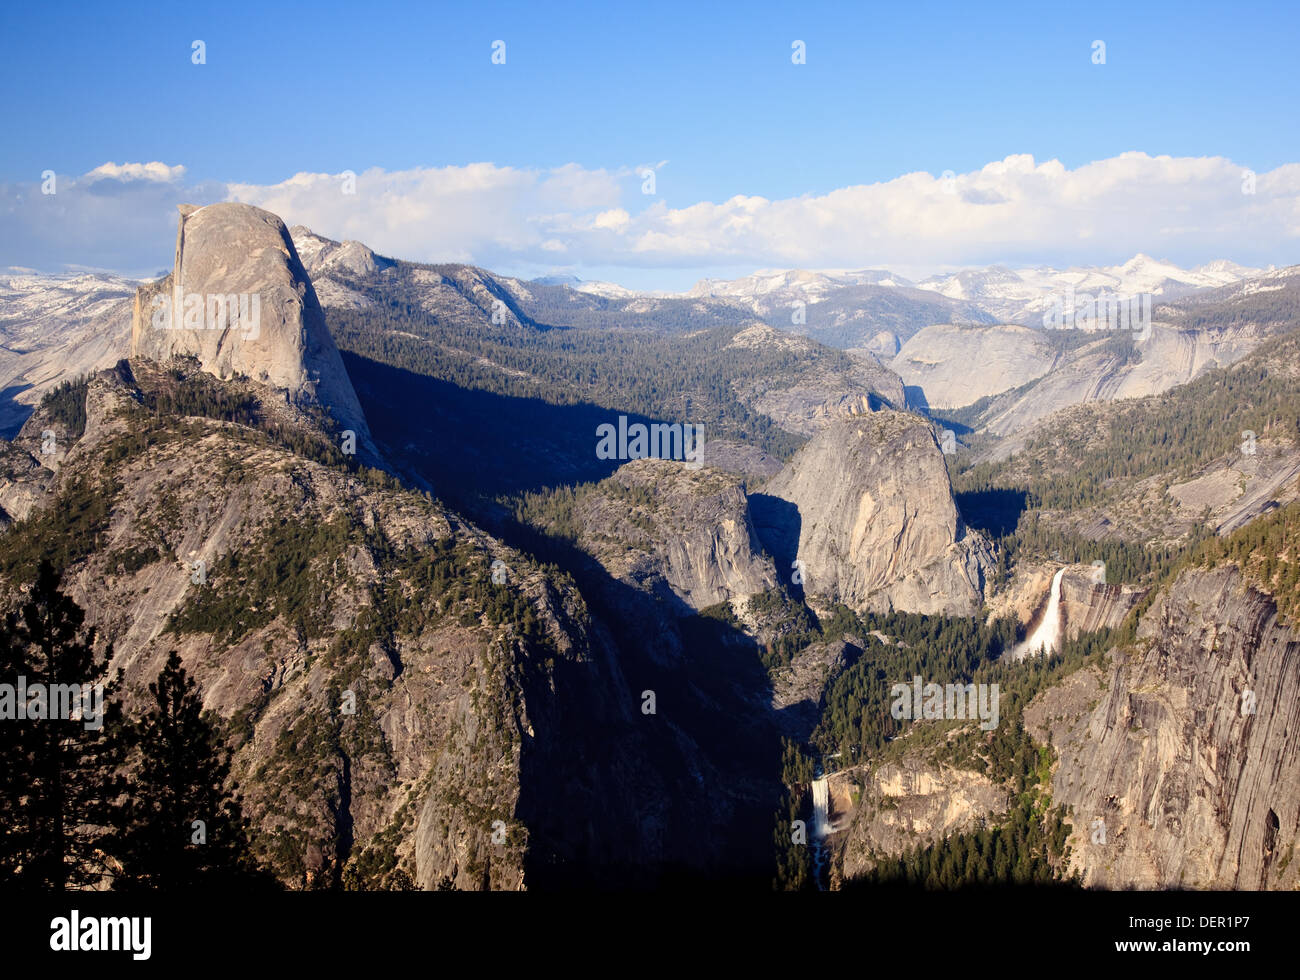 Half Dome mountain and waterfalls in Yosemite National Park with the snow-capped Sierra Mountains, California, USA Stock Photo